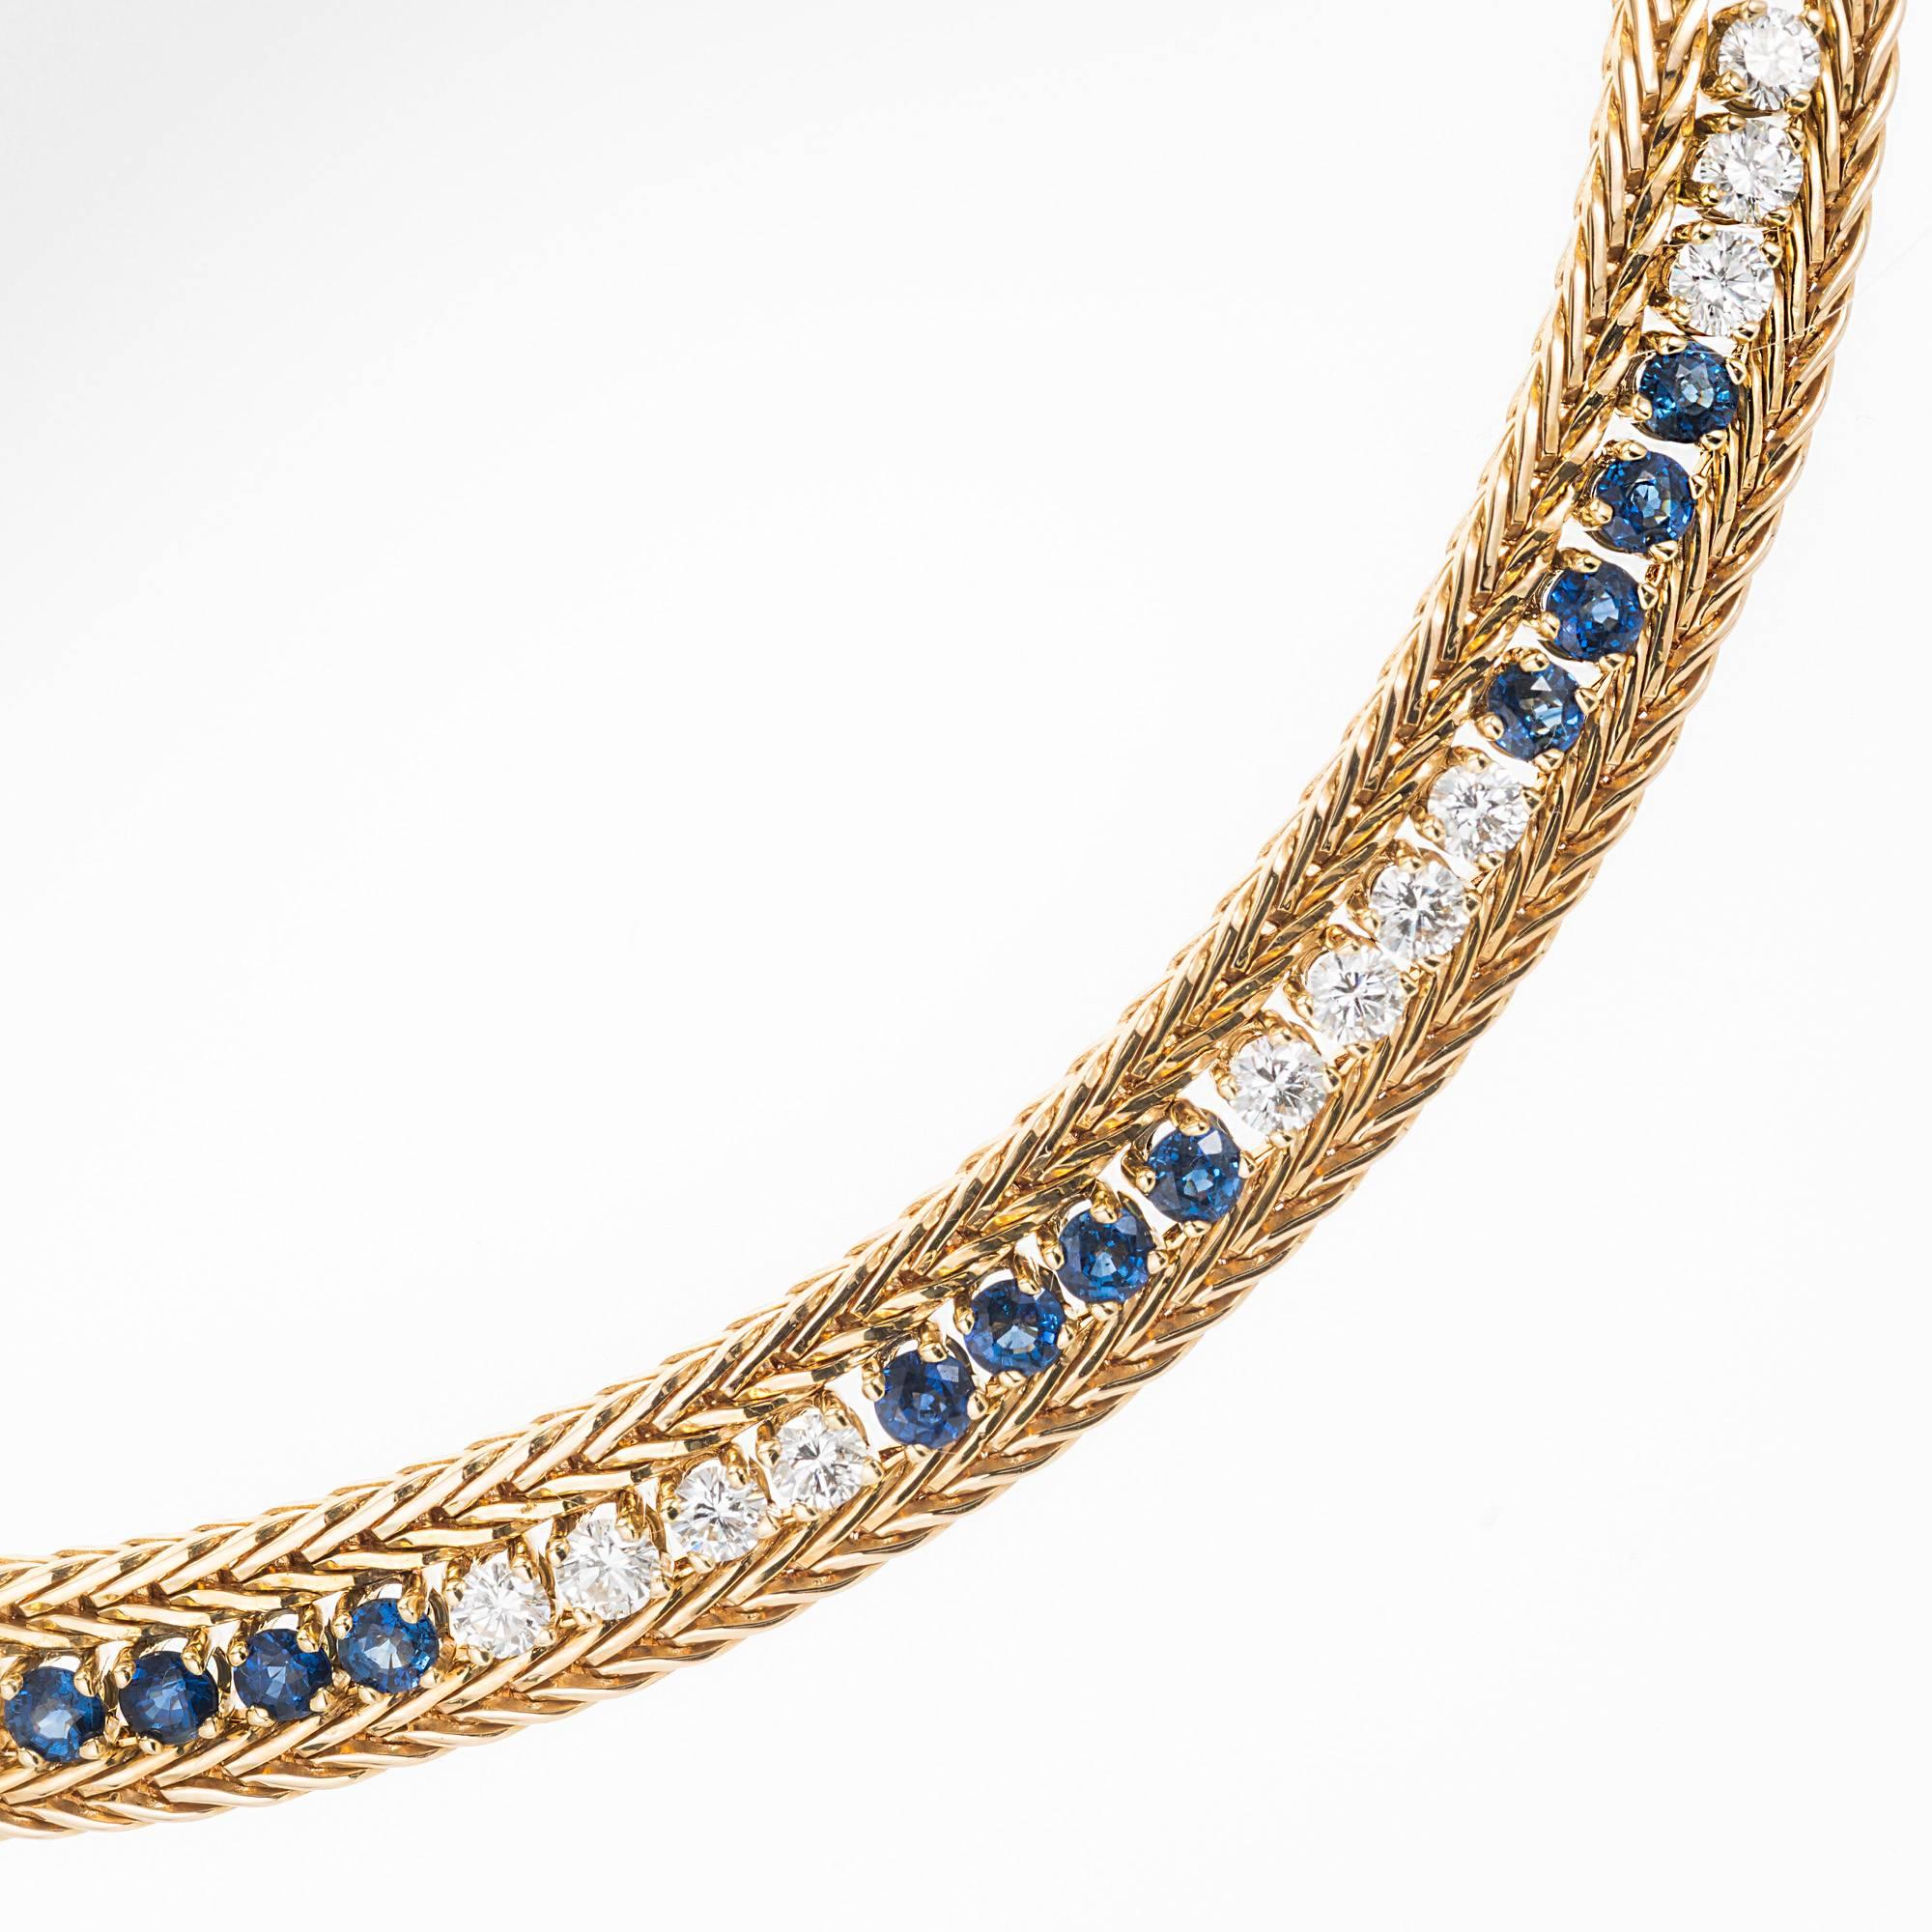 Vintage 1950's handmade diamond and sapphire necklace. 18k yellow gold necklace with wheat chain sides and extra fine blue Sapphires and white Diamonds set all around in groups of four. 15.5 inches

60 round full cut Diamonds, approx. total weight